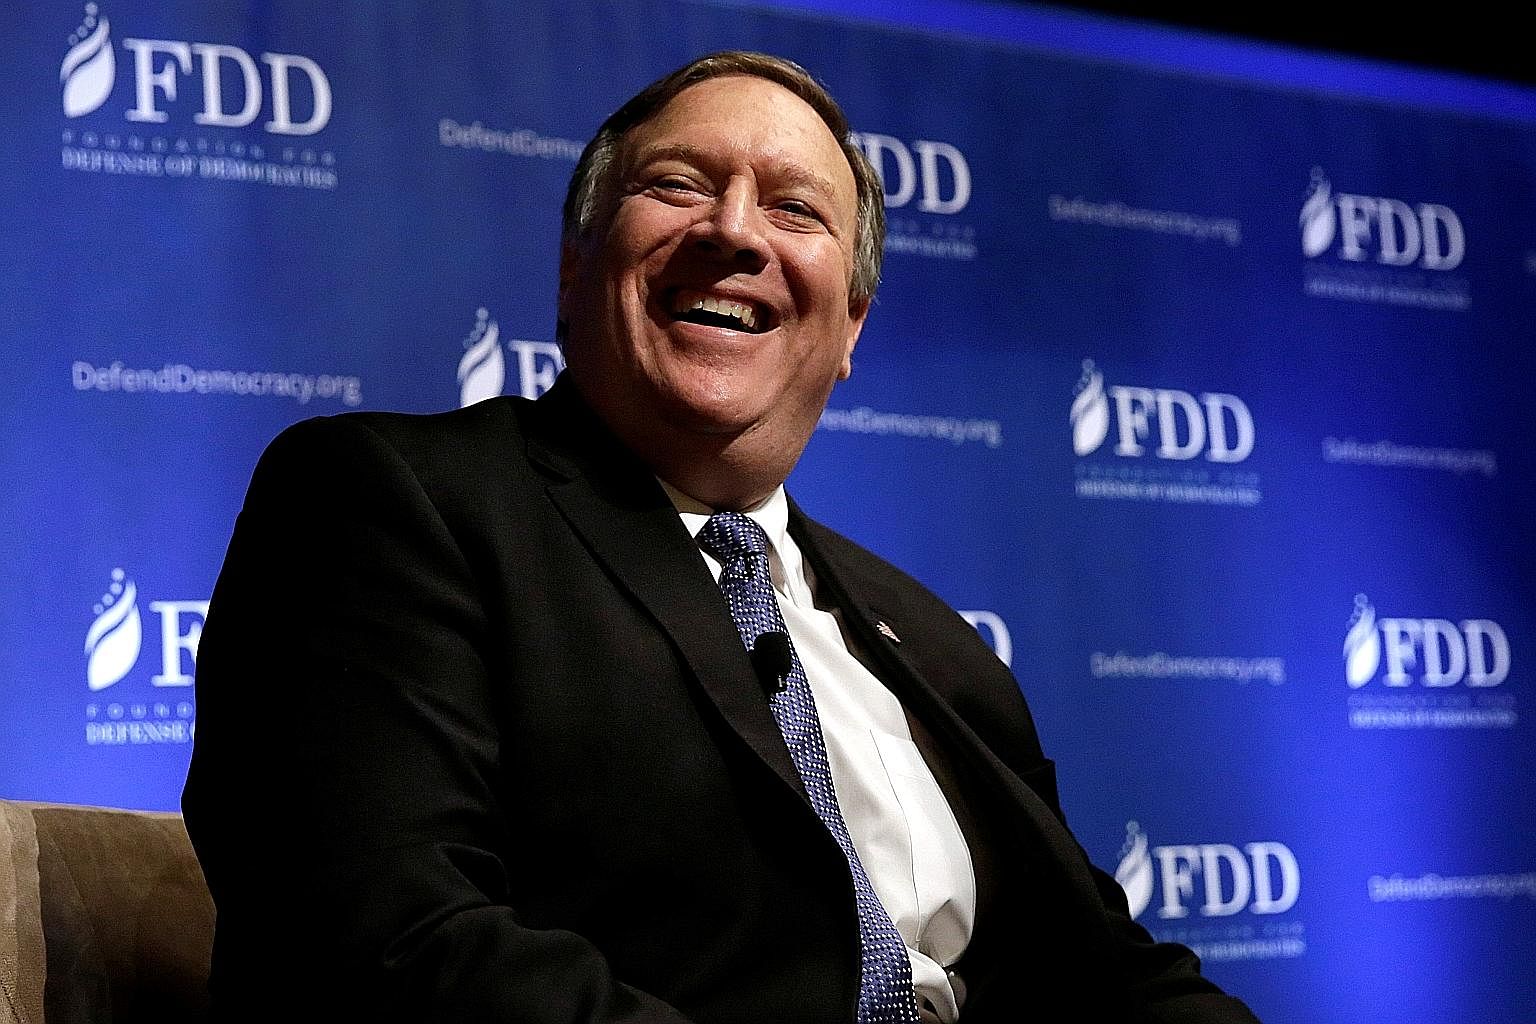 Mr Mike Pompeo, who will replace Mr Rex Tillerson as secretary of state, subject to Senate confirmation, is a former Tea Party congressman who served three terms in the state of Kansas. As CIA director, he has been meeting US President Donald Trump a